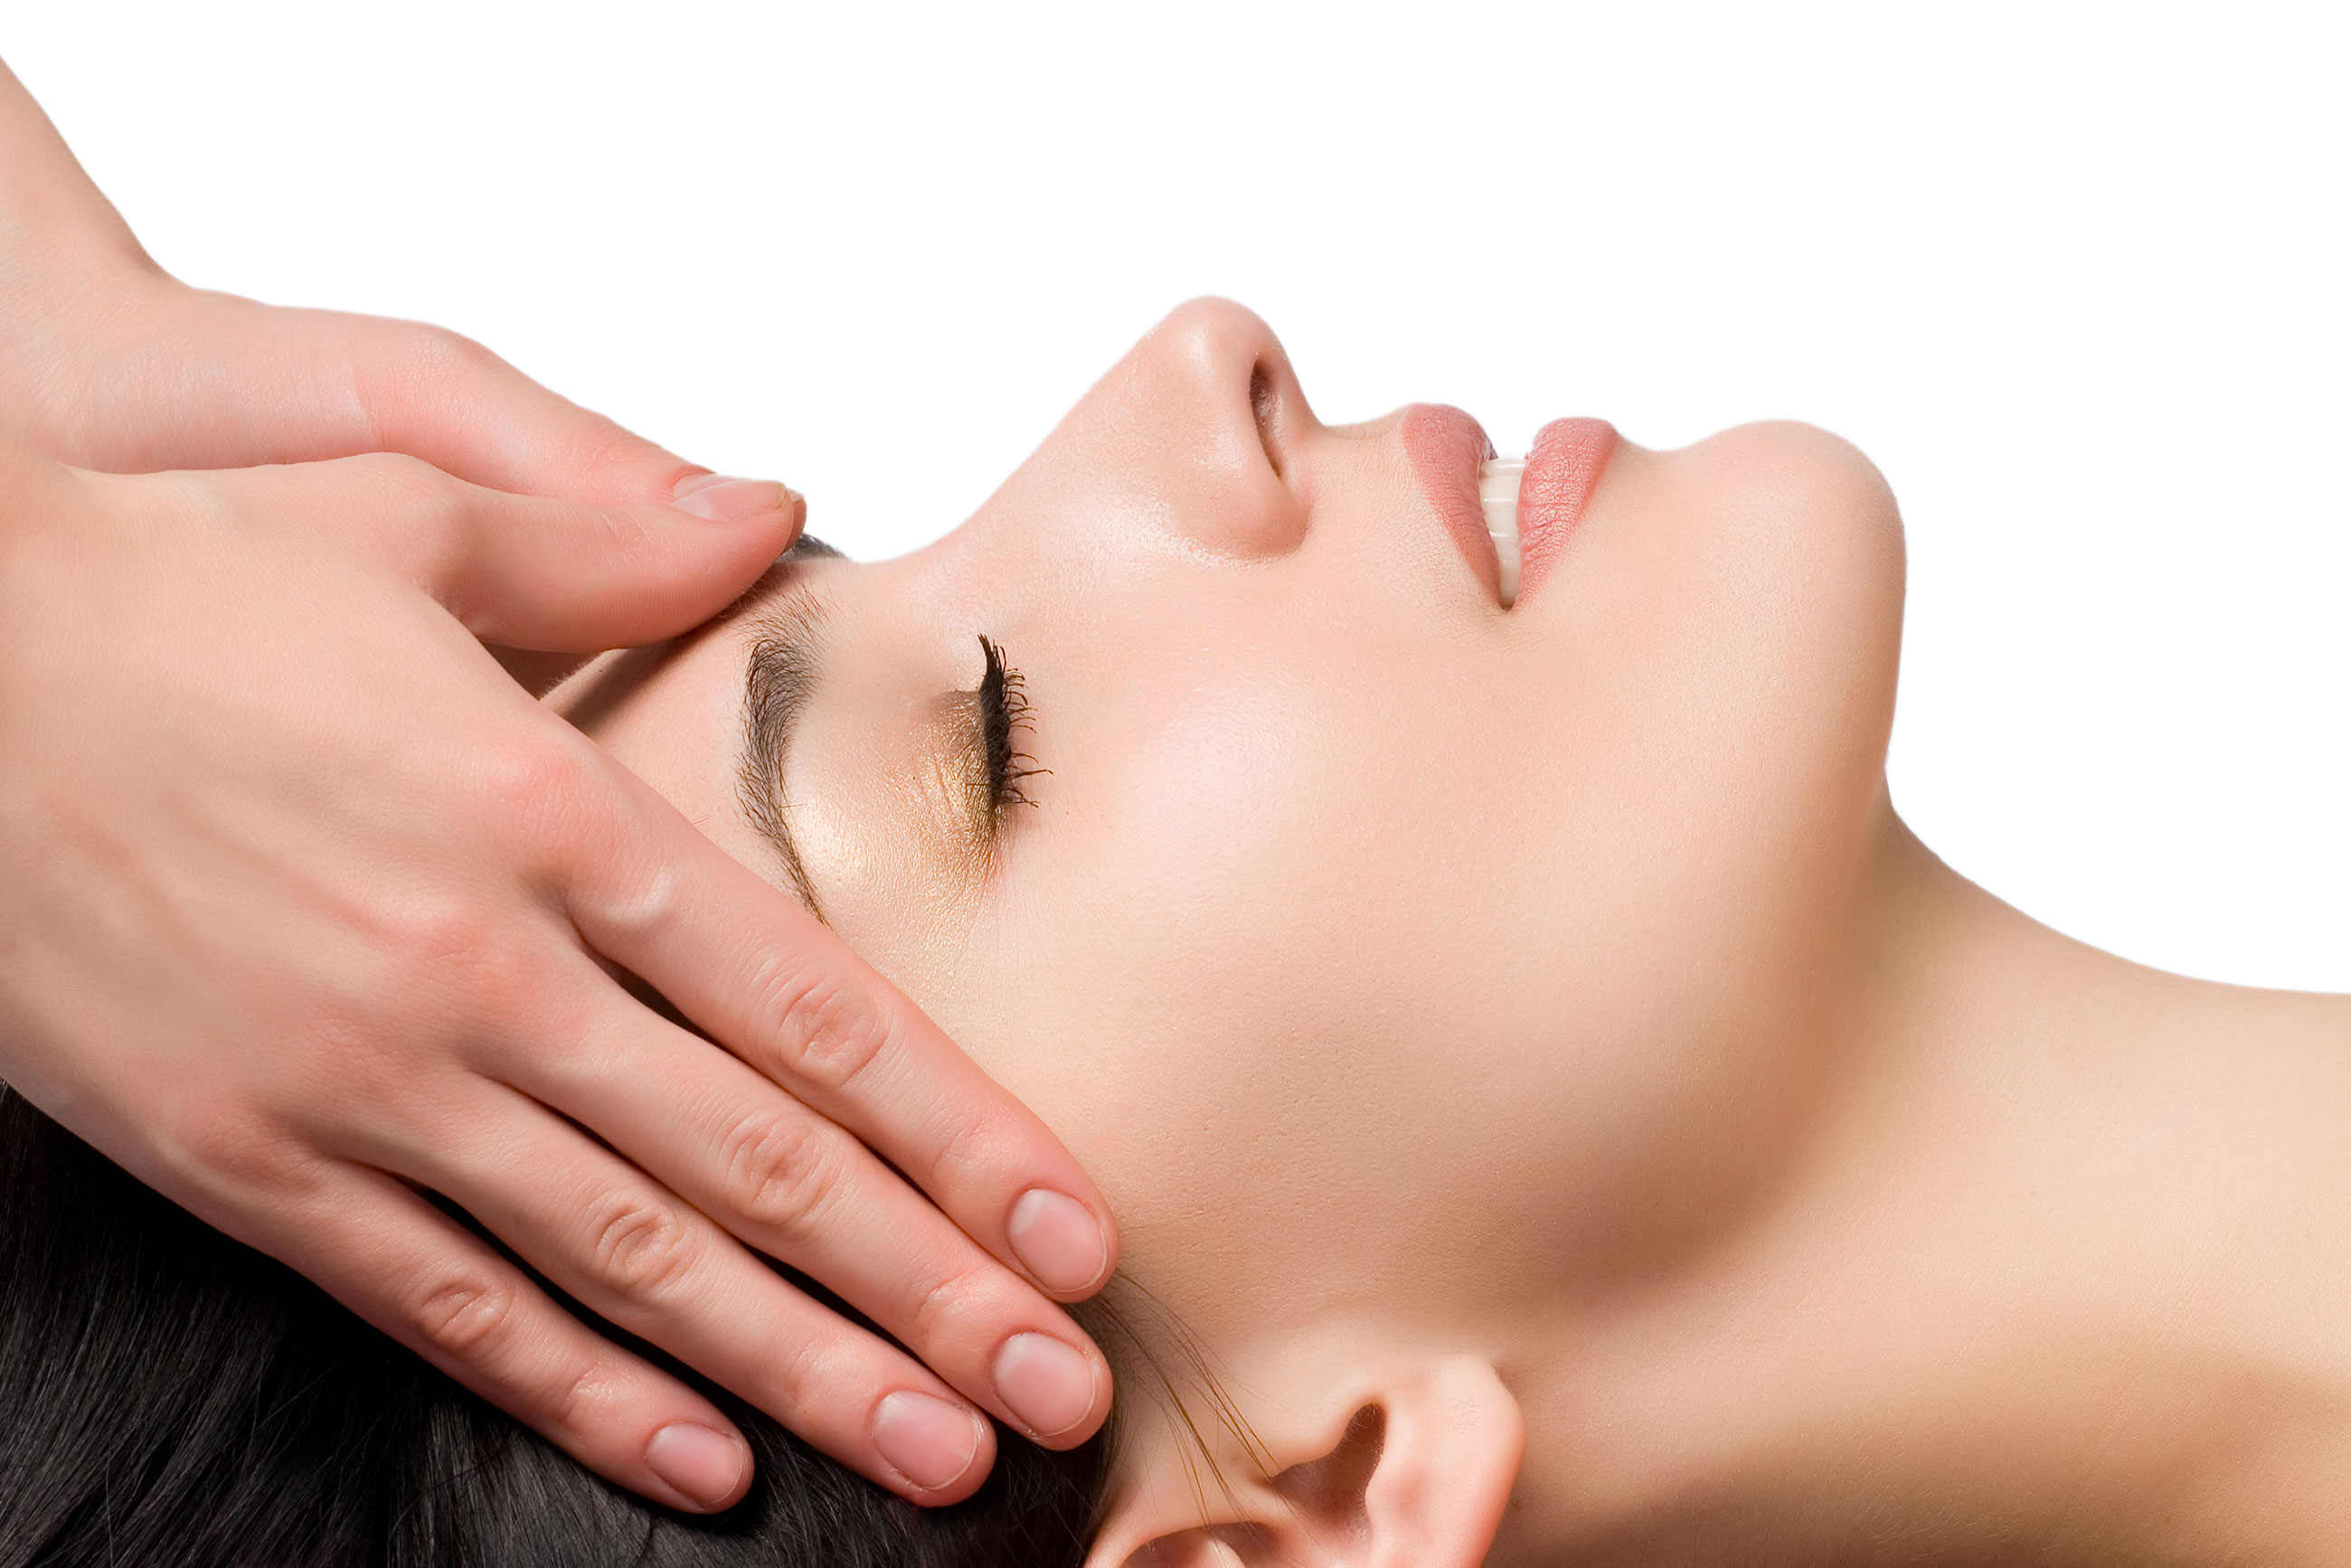 Massage For Tension Headaches - 5 Ways to Get Relief With Massage Today